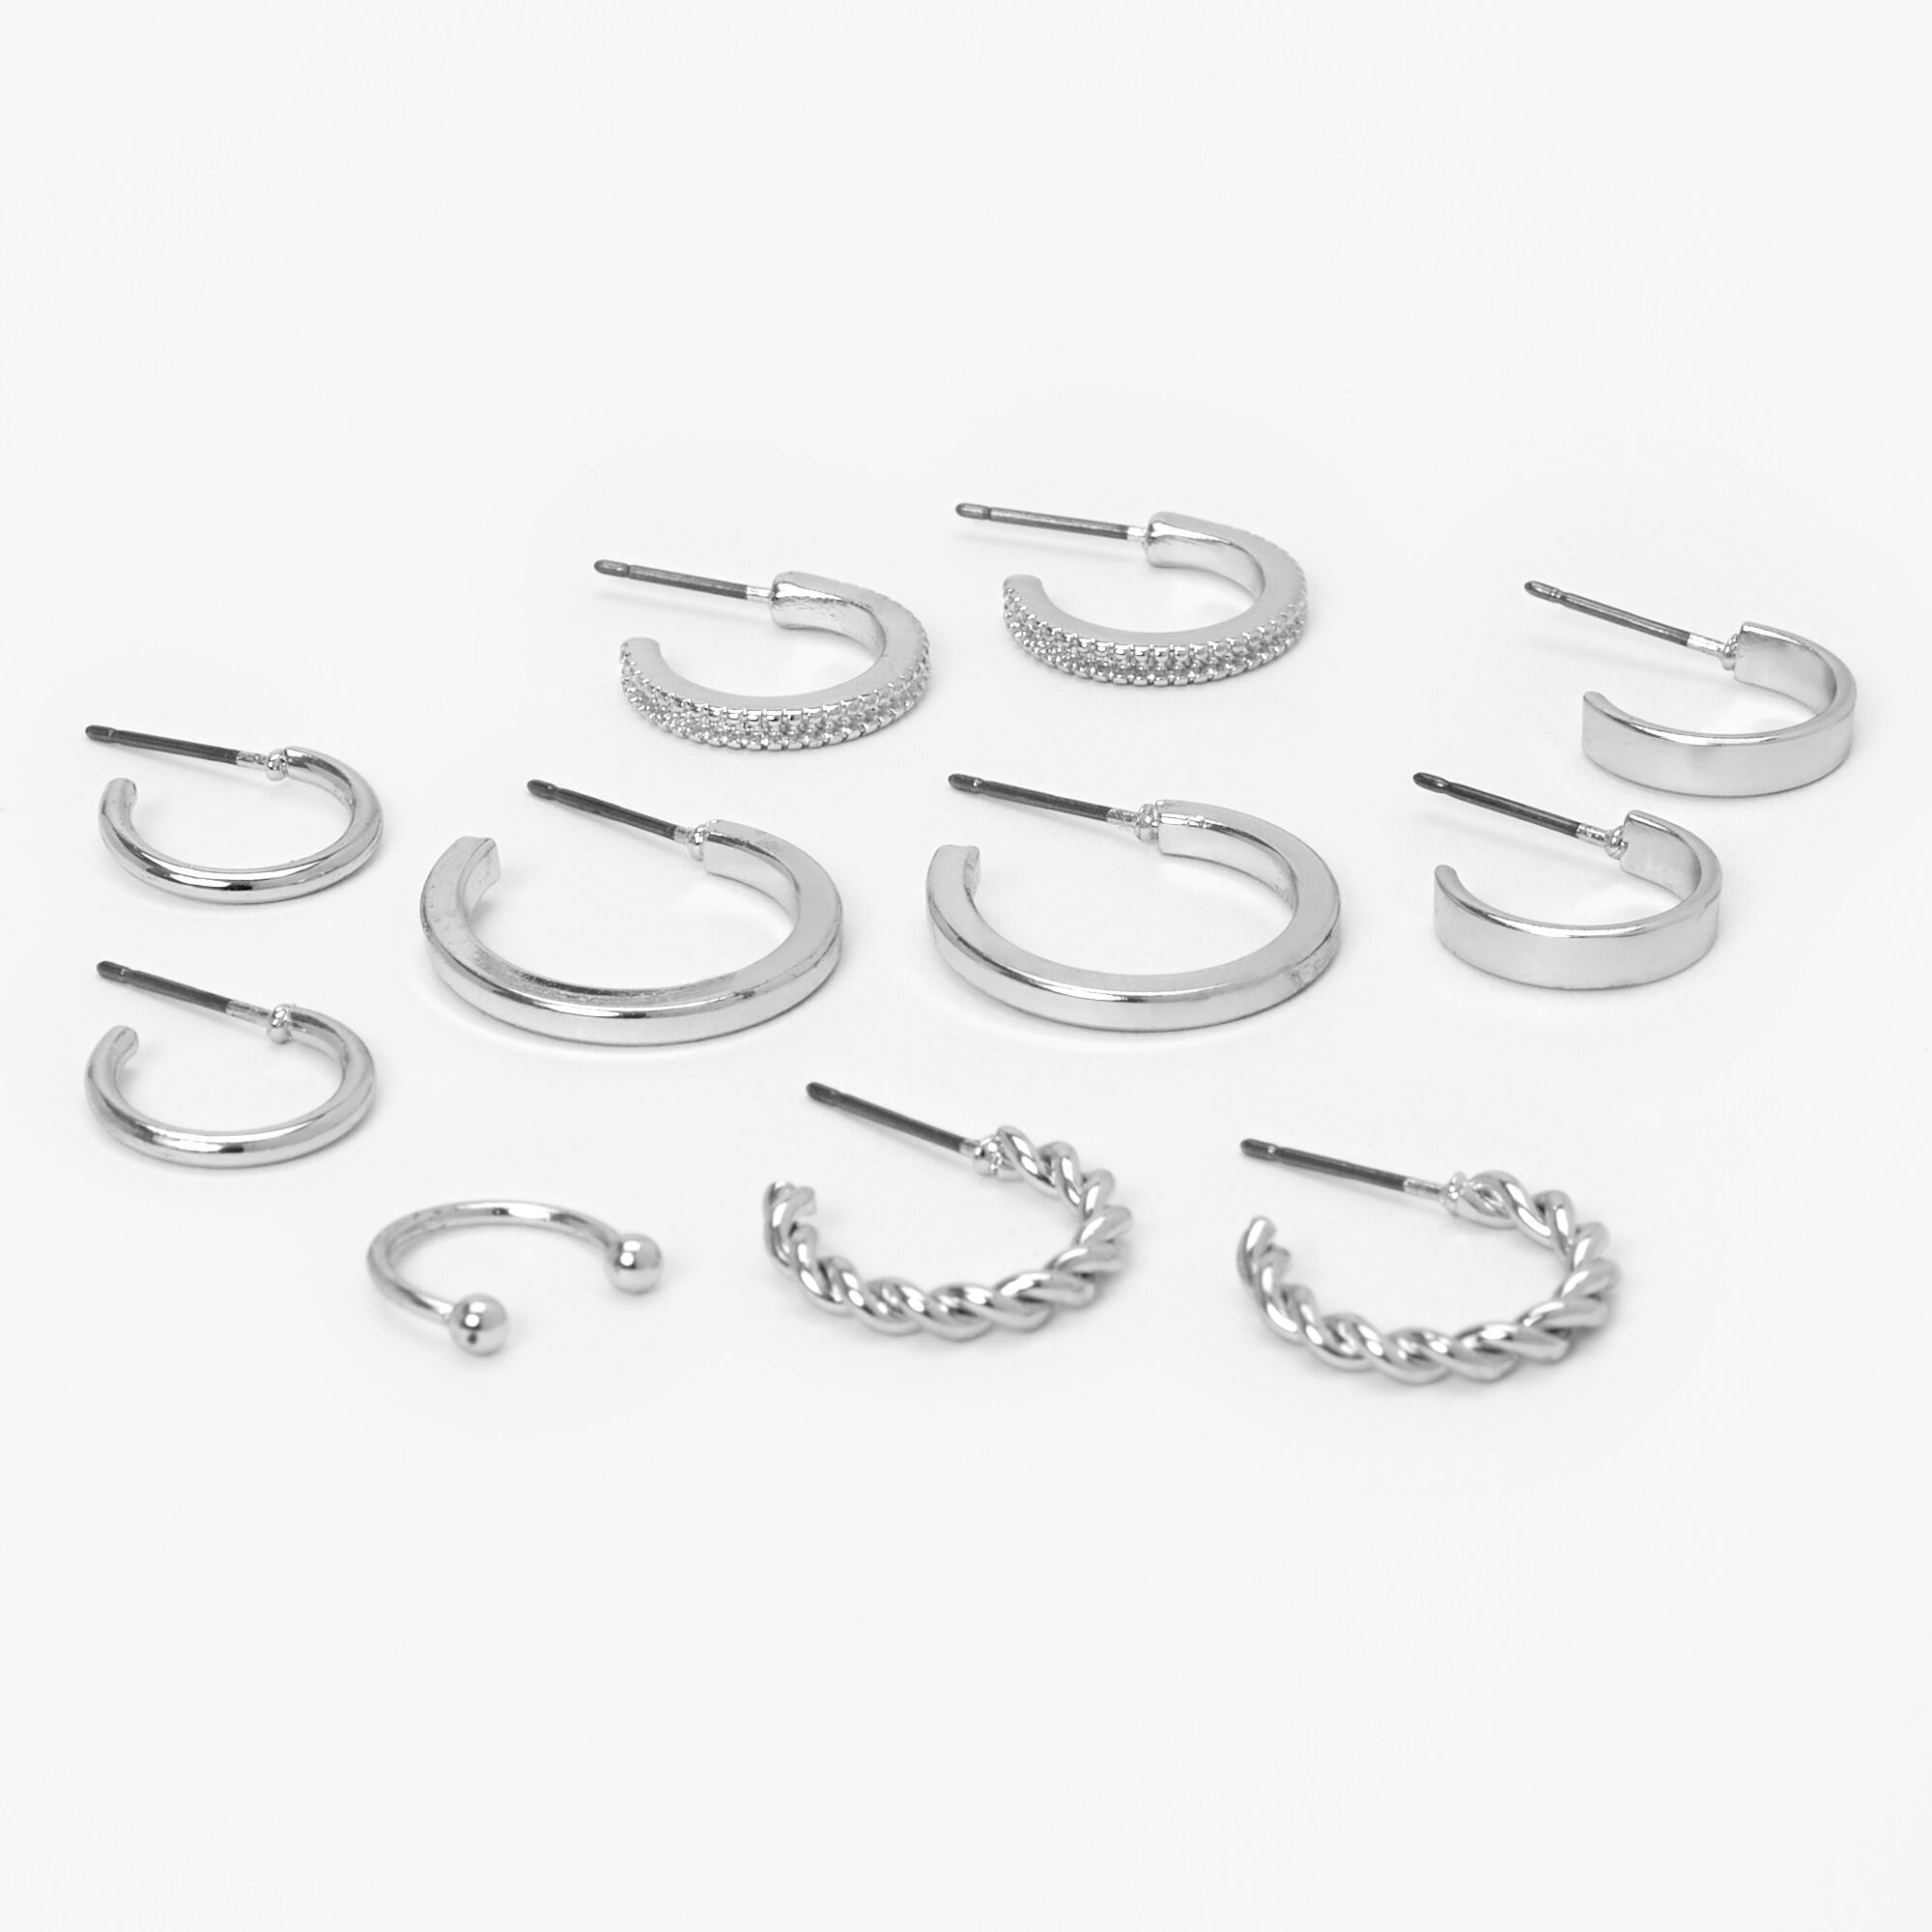 View Claires Tone Mixed Hoop Earrings And Ear Cuff Set 6 Pack Silver information